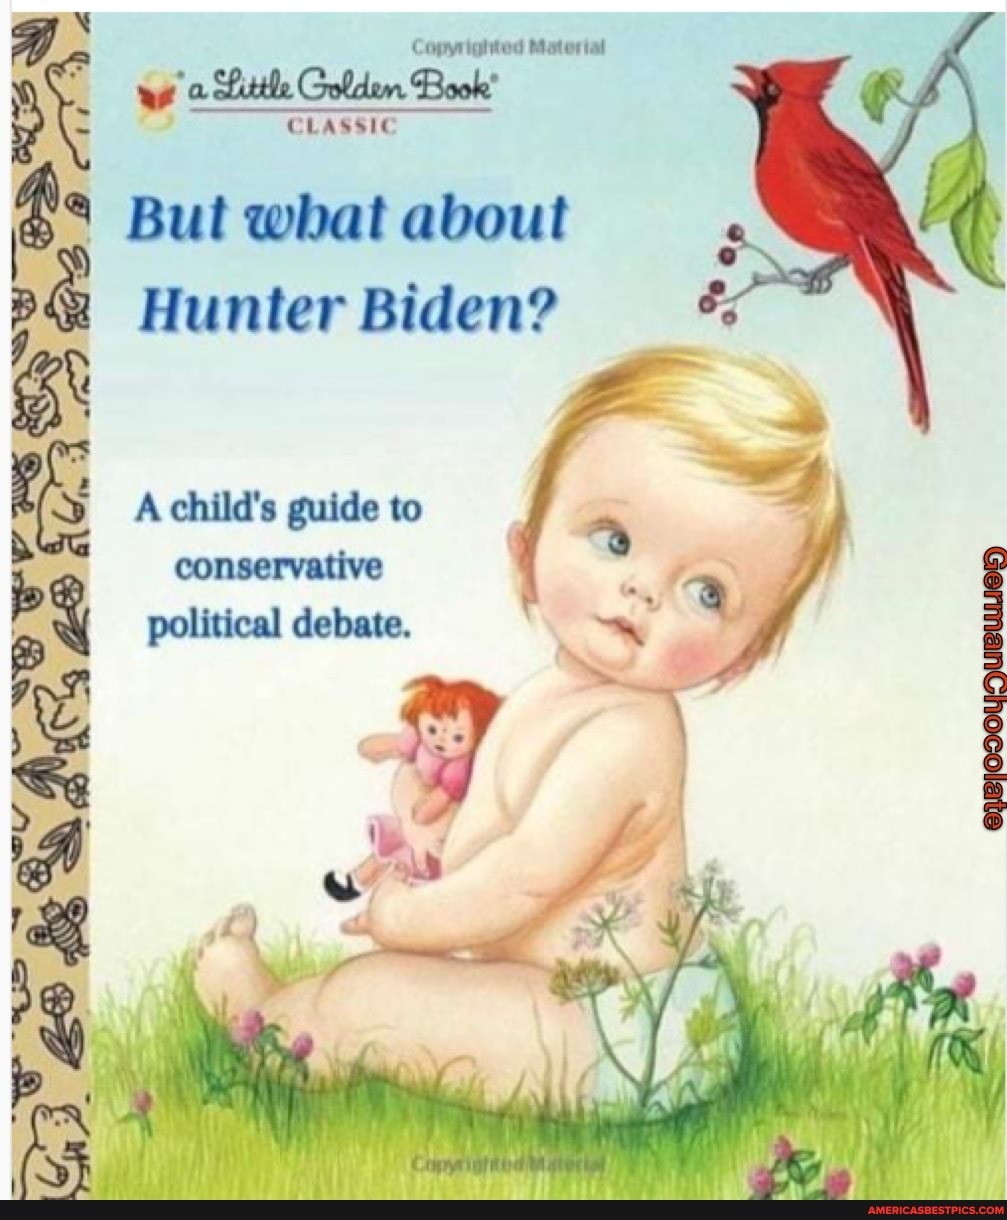 Copyniiatited Matertal WA CLASSIC As But what about Hunter Biden? A child's  guide to conservative political debate. - America's best pics and videos